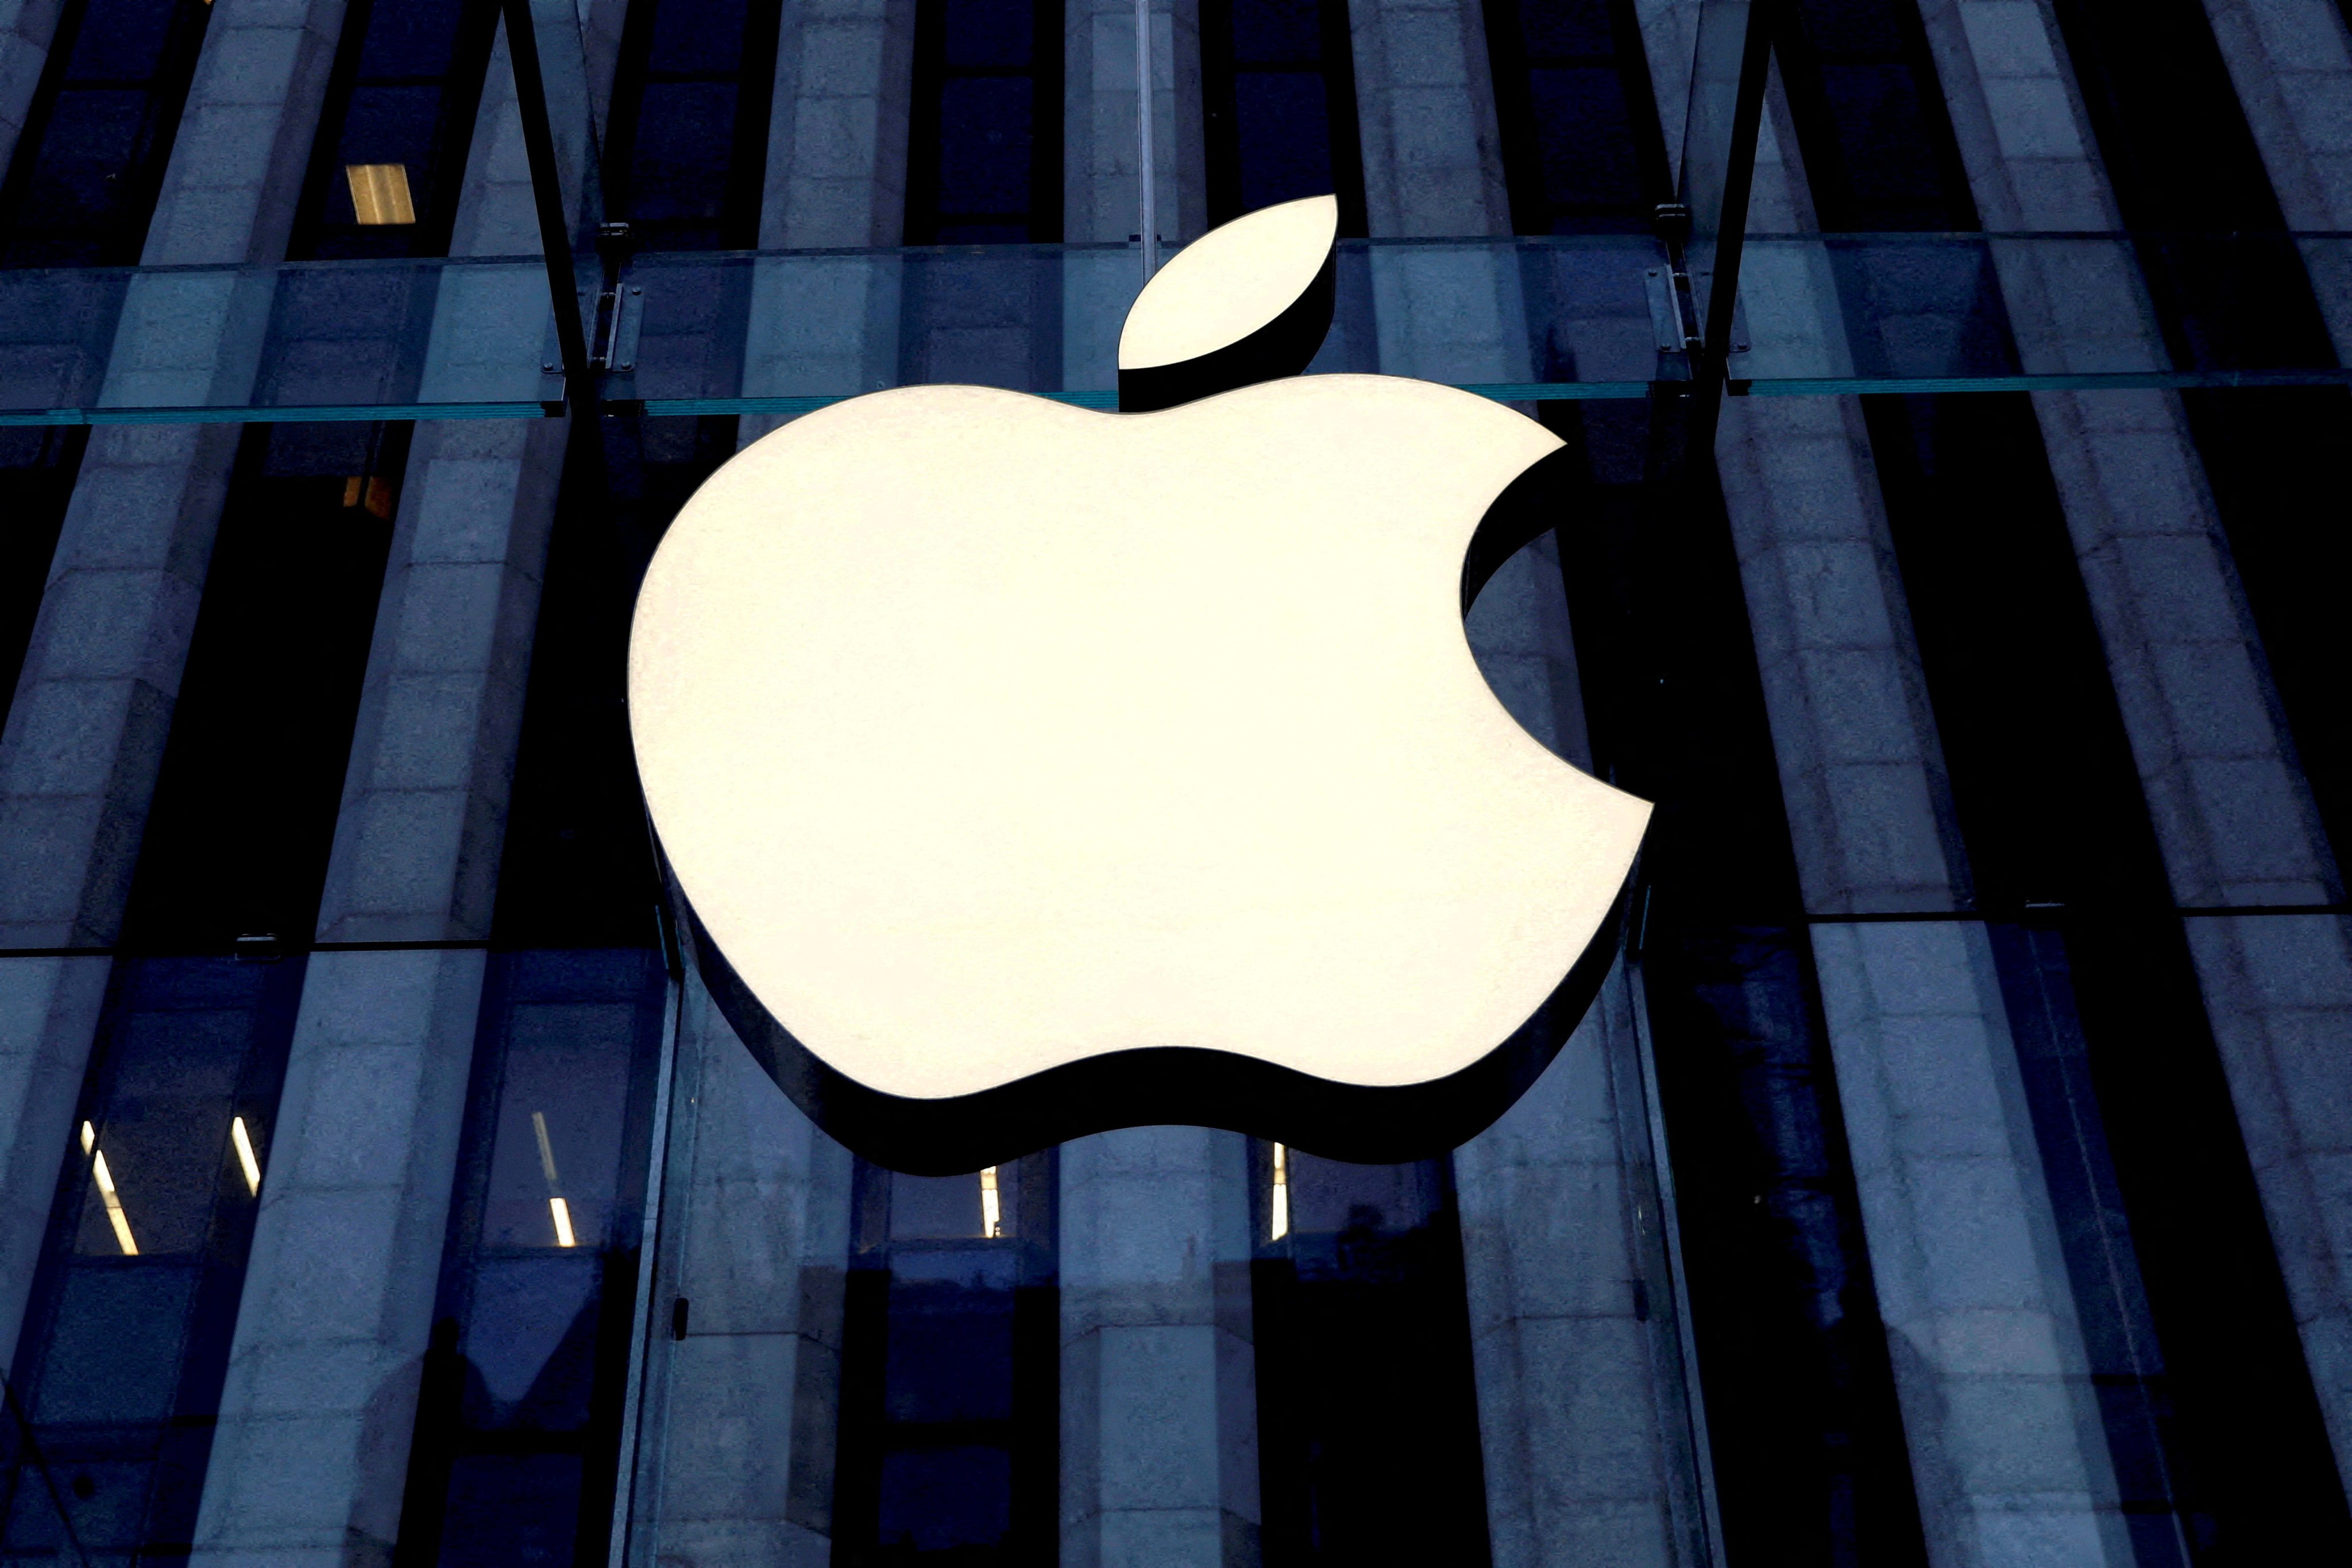 The European Commission fined Apple almost $2 billion for unfair competitive practices involving its music streaming service. Photo: Reuters